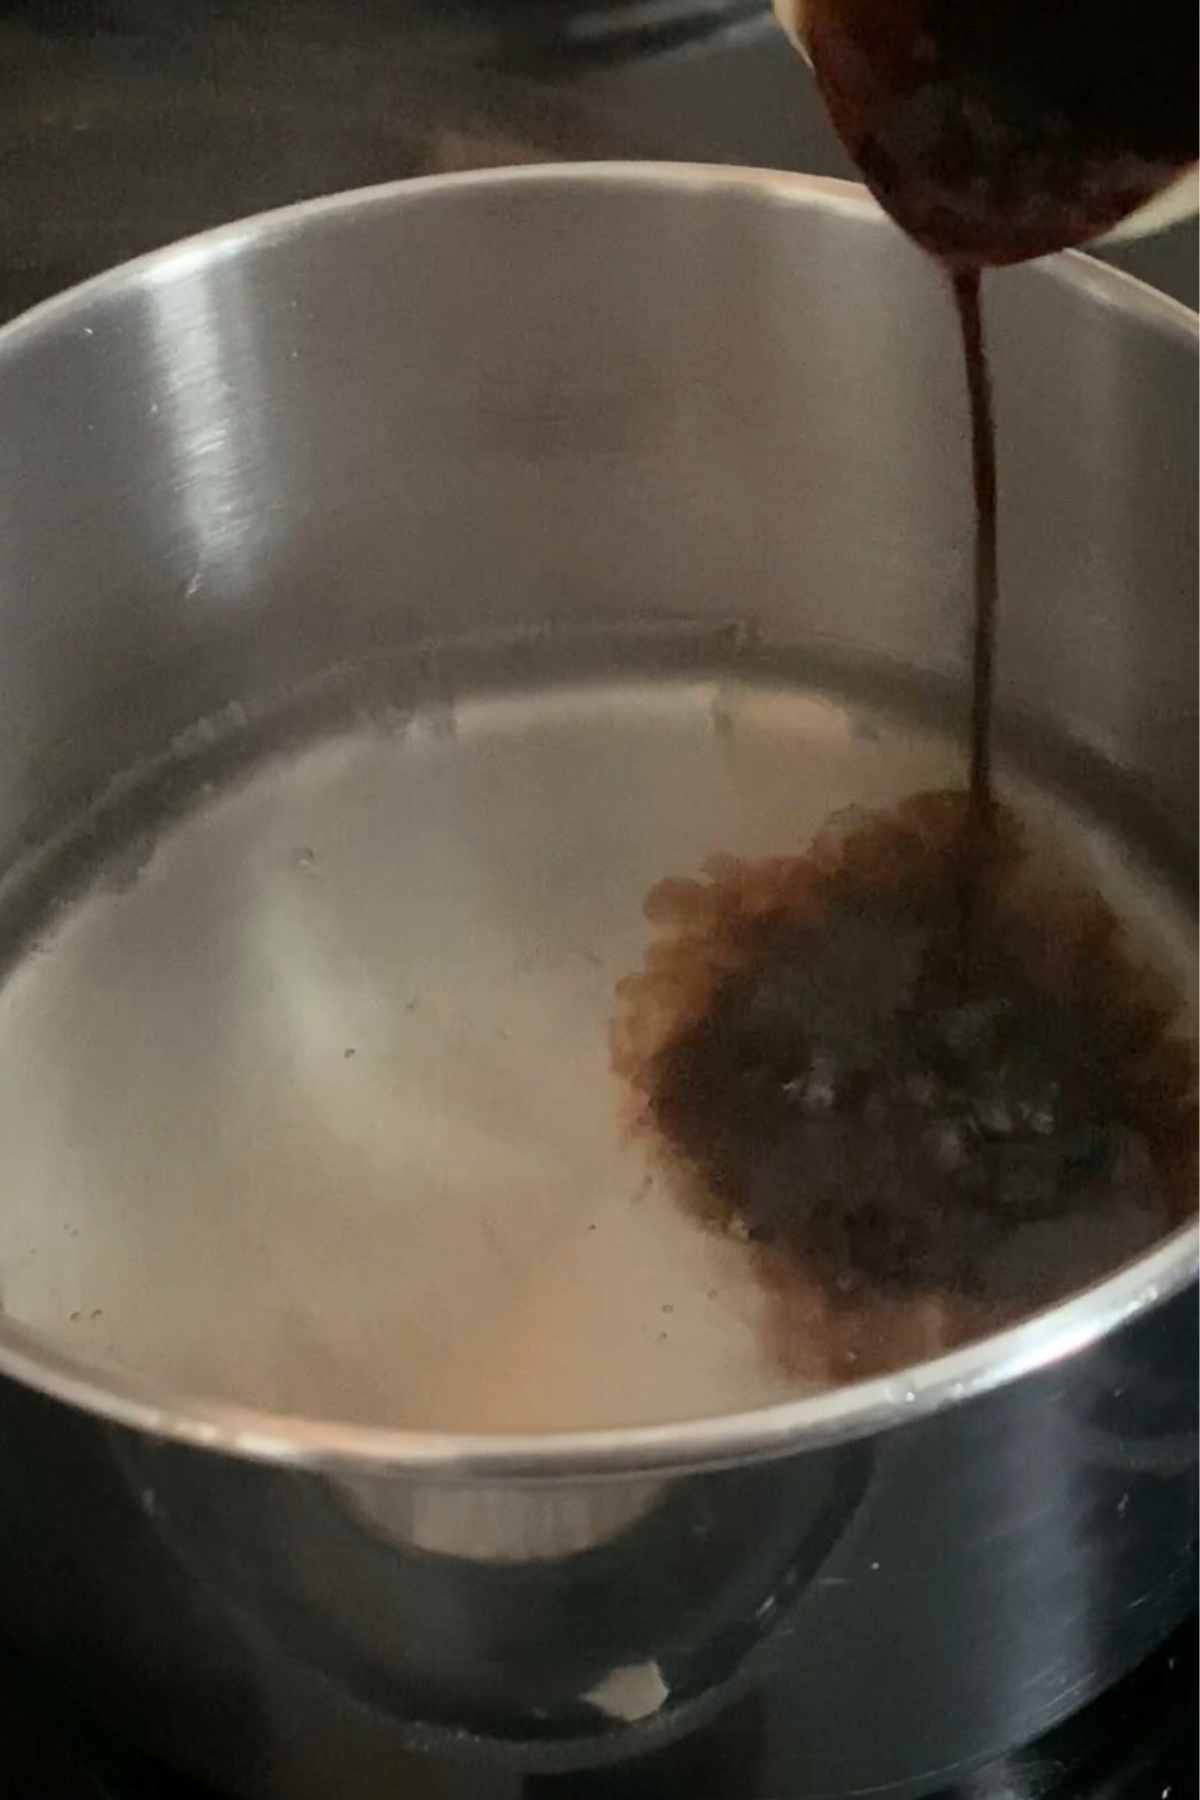 Adding vanilla to the simple syrup.